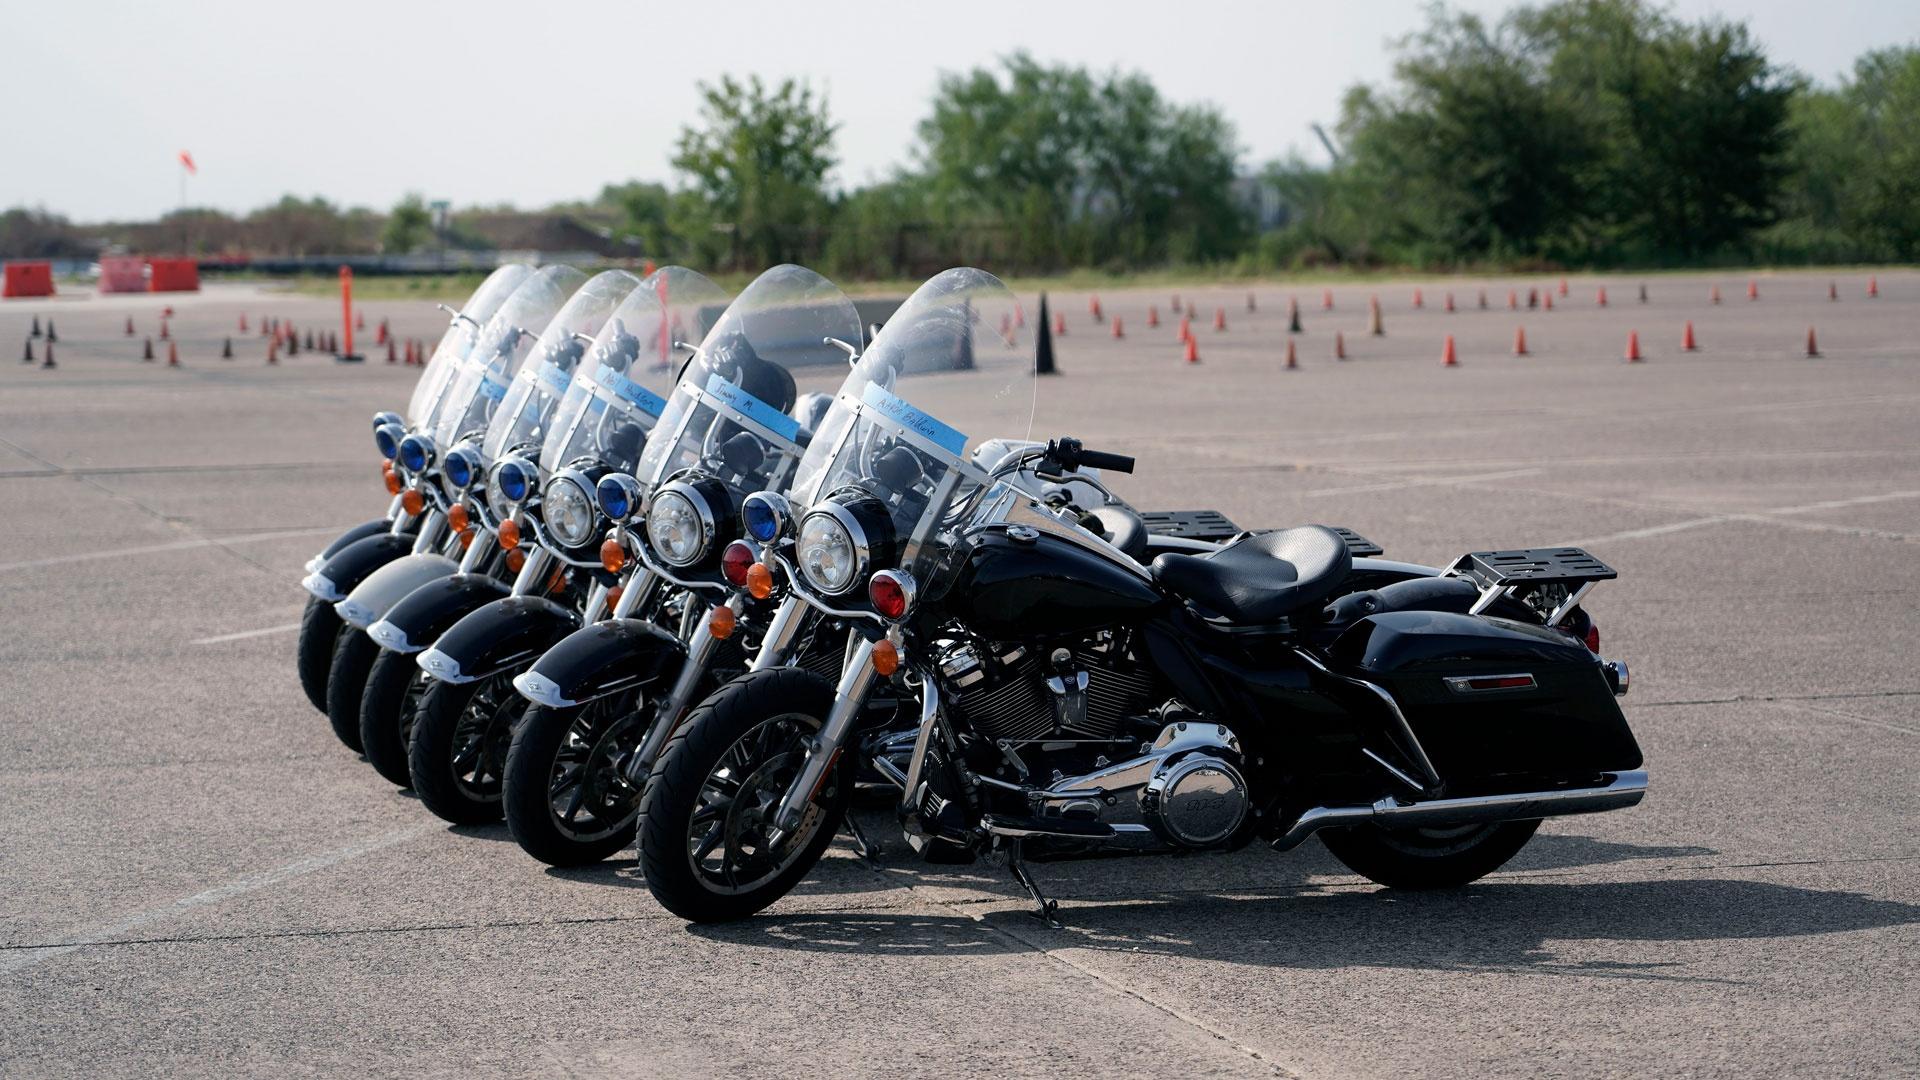 A row of police motorcycles stands ready for a TEEX training session, as featured on Season 2 of "Texas A&M Today."